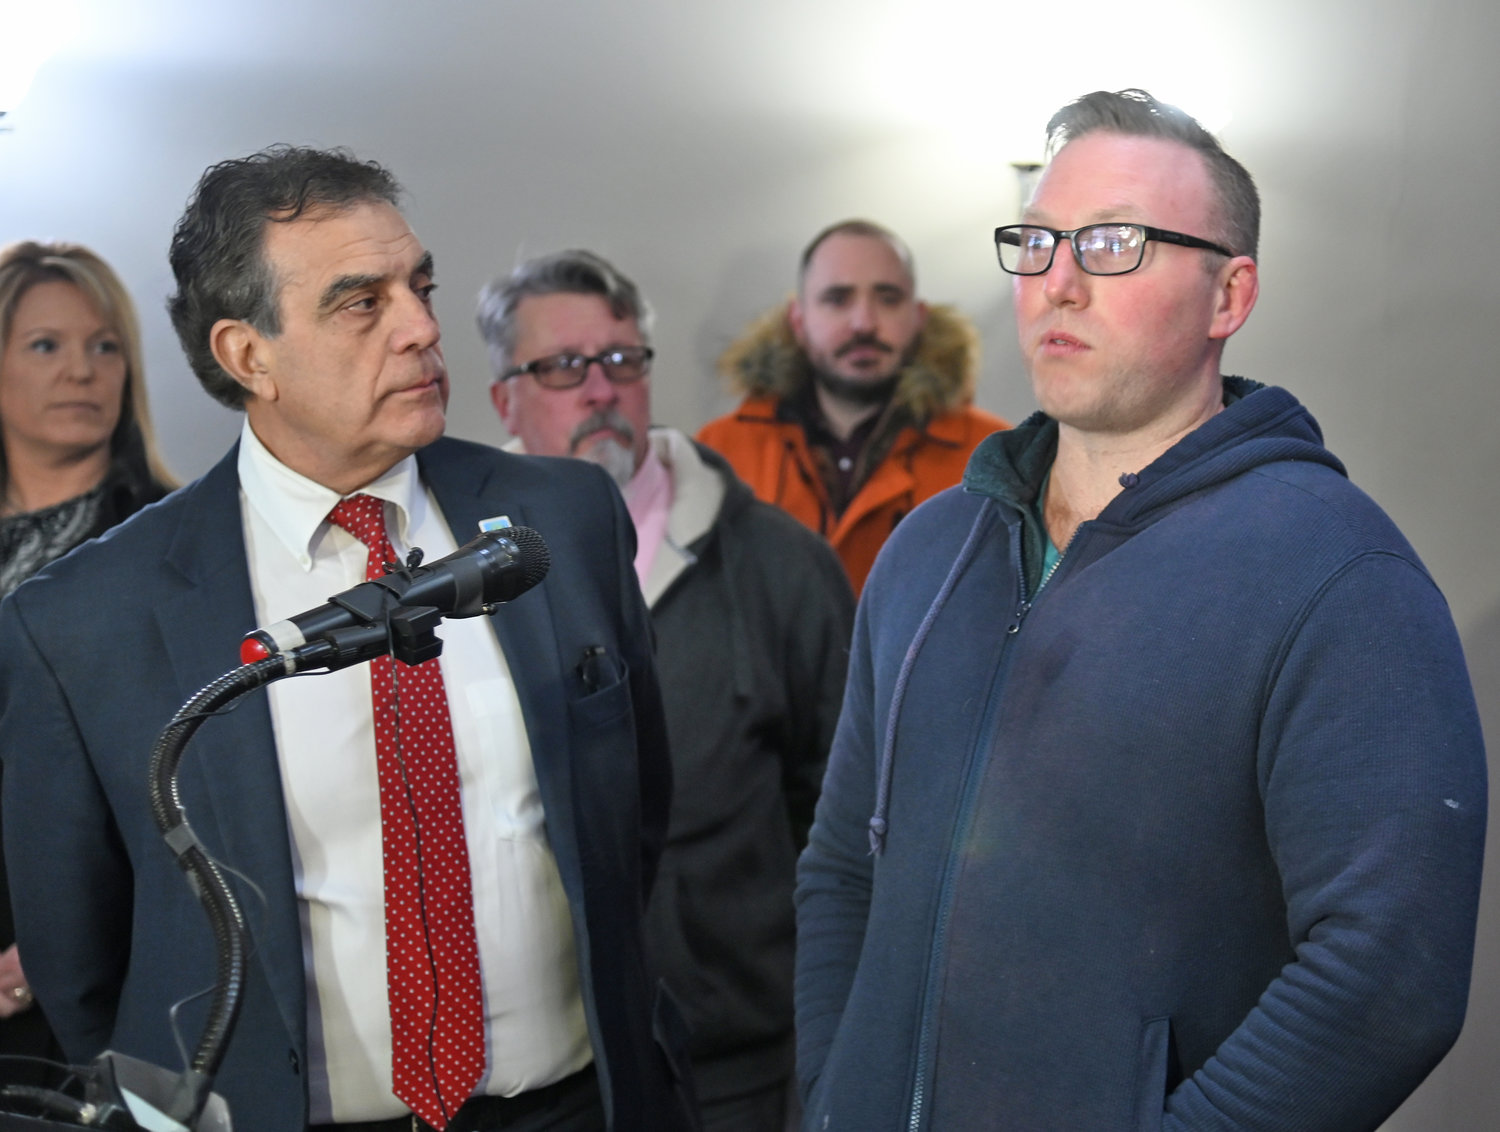 Travis McNeil, right, talks with Mayor Robert Palmieri inside the building at 238 Genesee St. on Tuesday, Jan. 24. The building, officials said, will be completely rehabilitated.